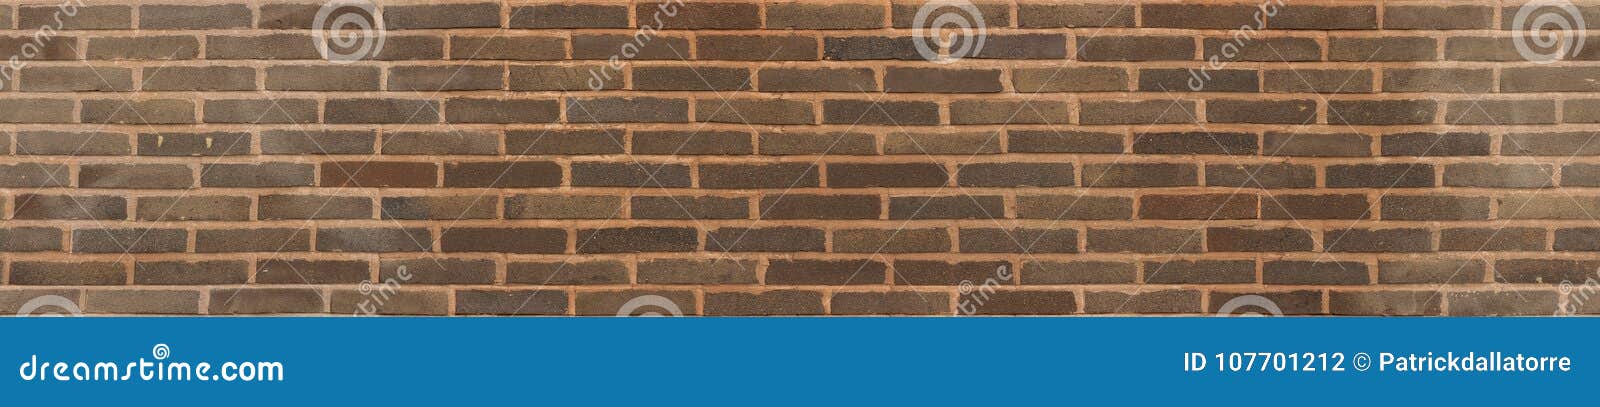 20 Brick Wall Texture Free for Commercial Use – Free Seamless Textures -  All rights reseved